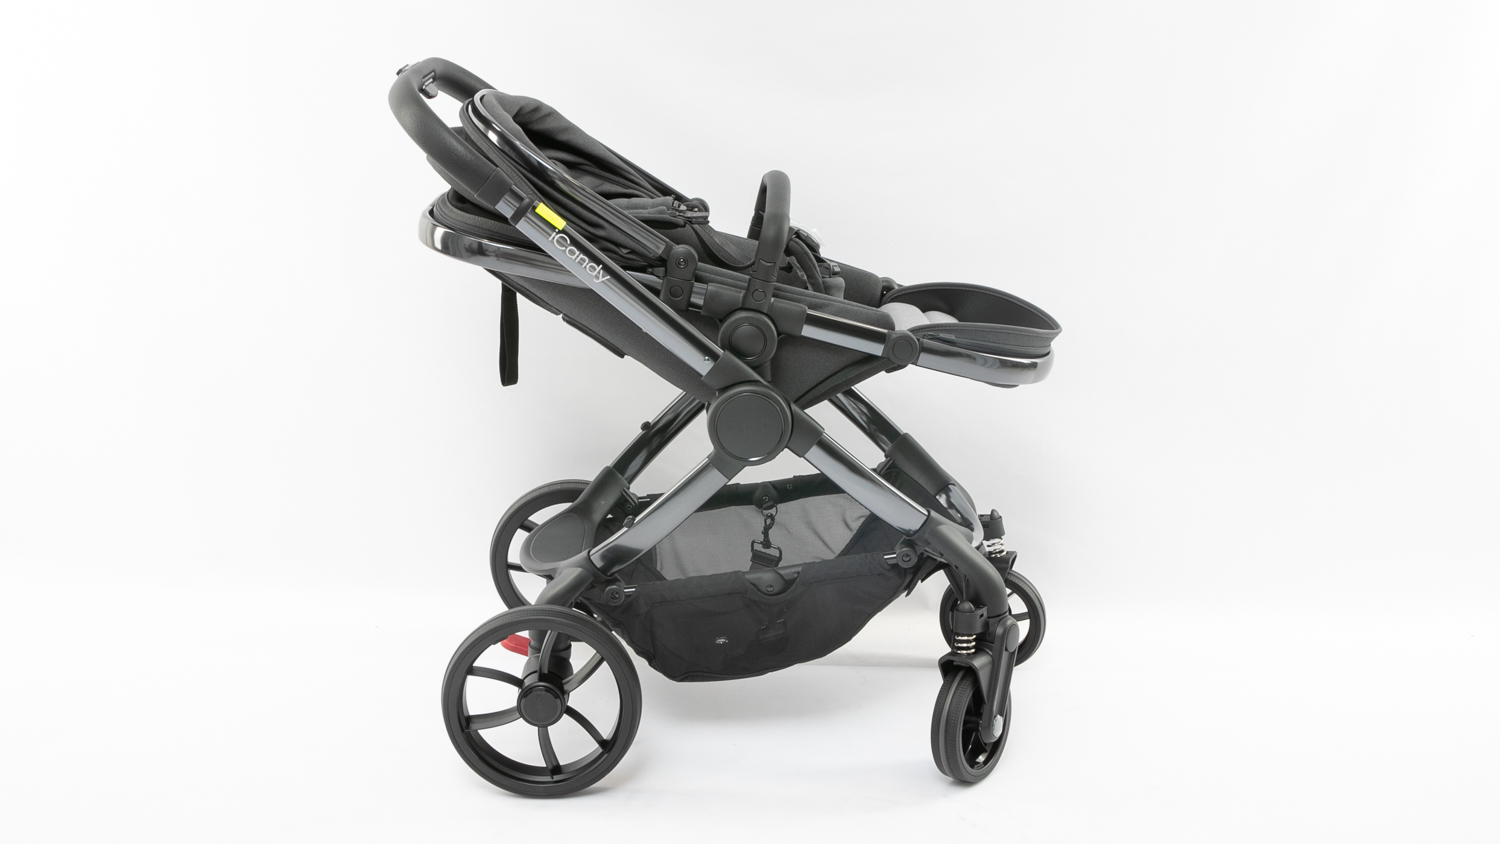 iCandy Peach 7 Review | Pram and stroller | CHOICE